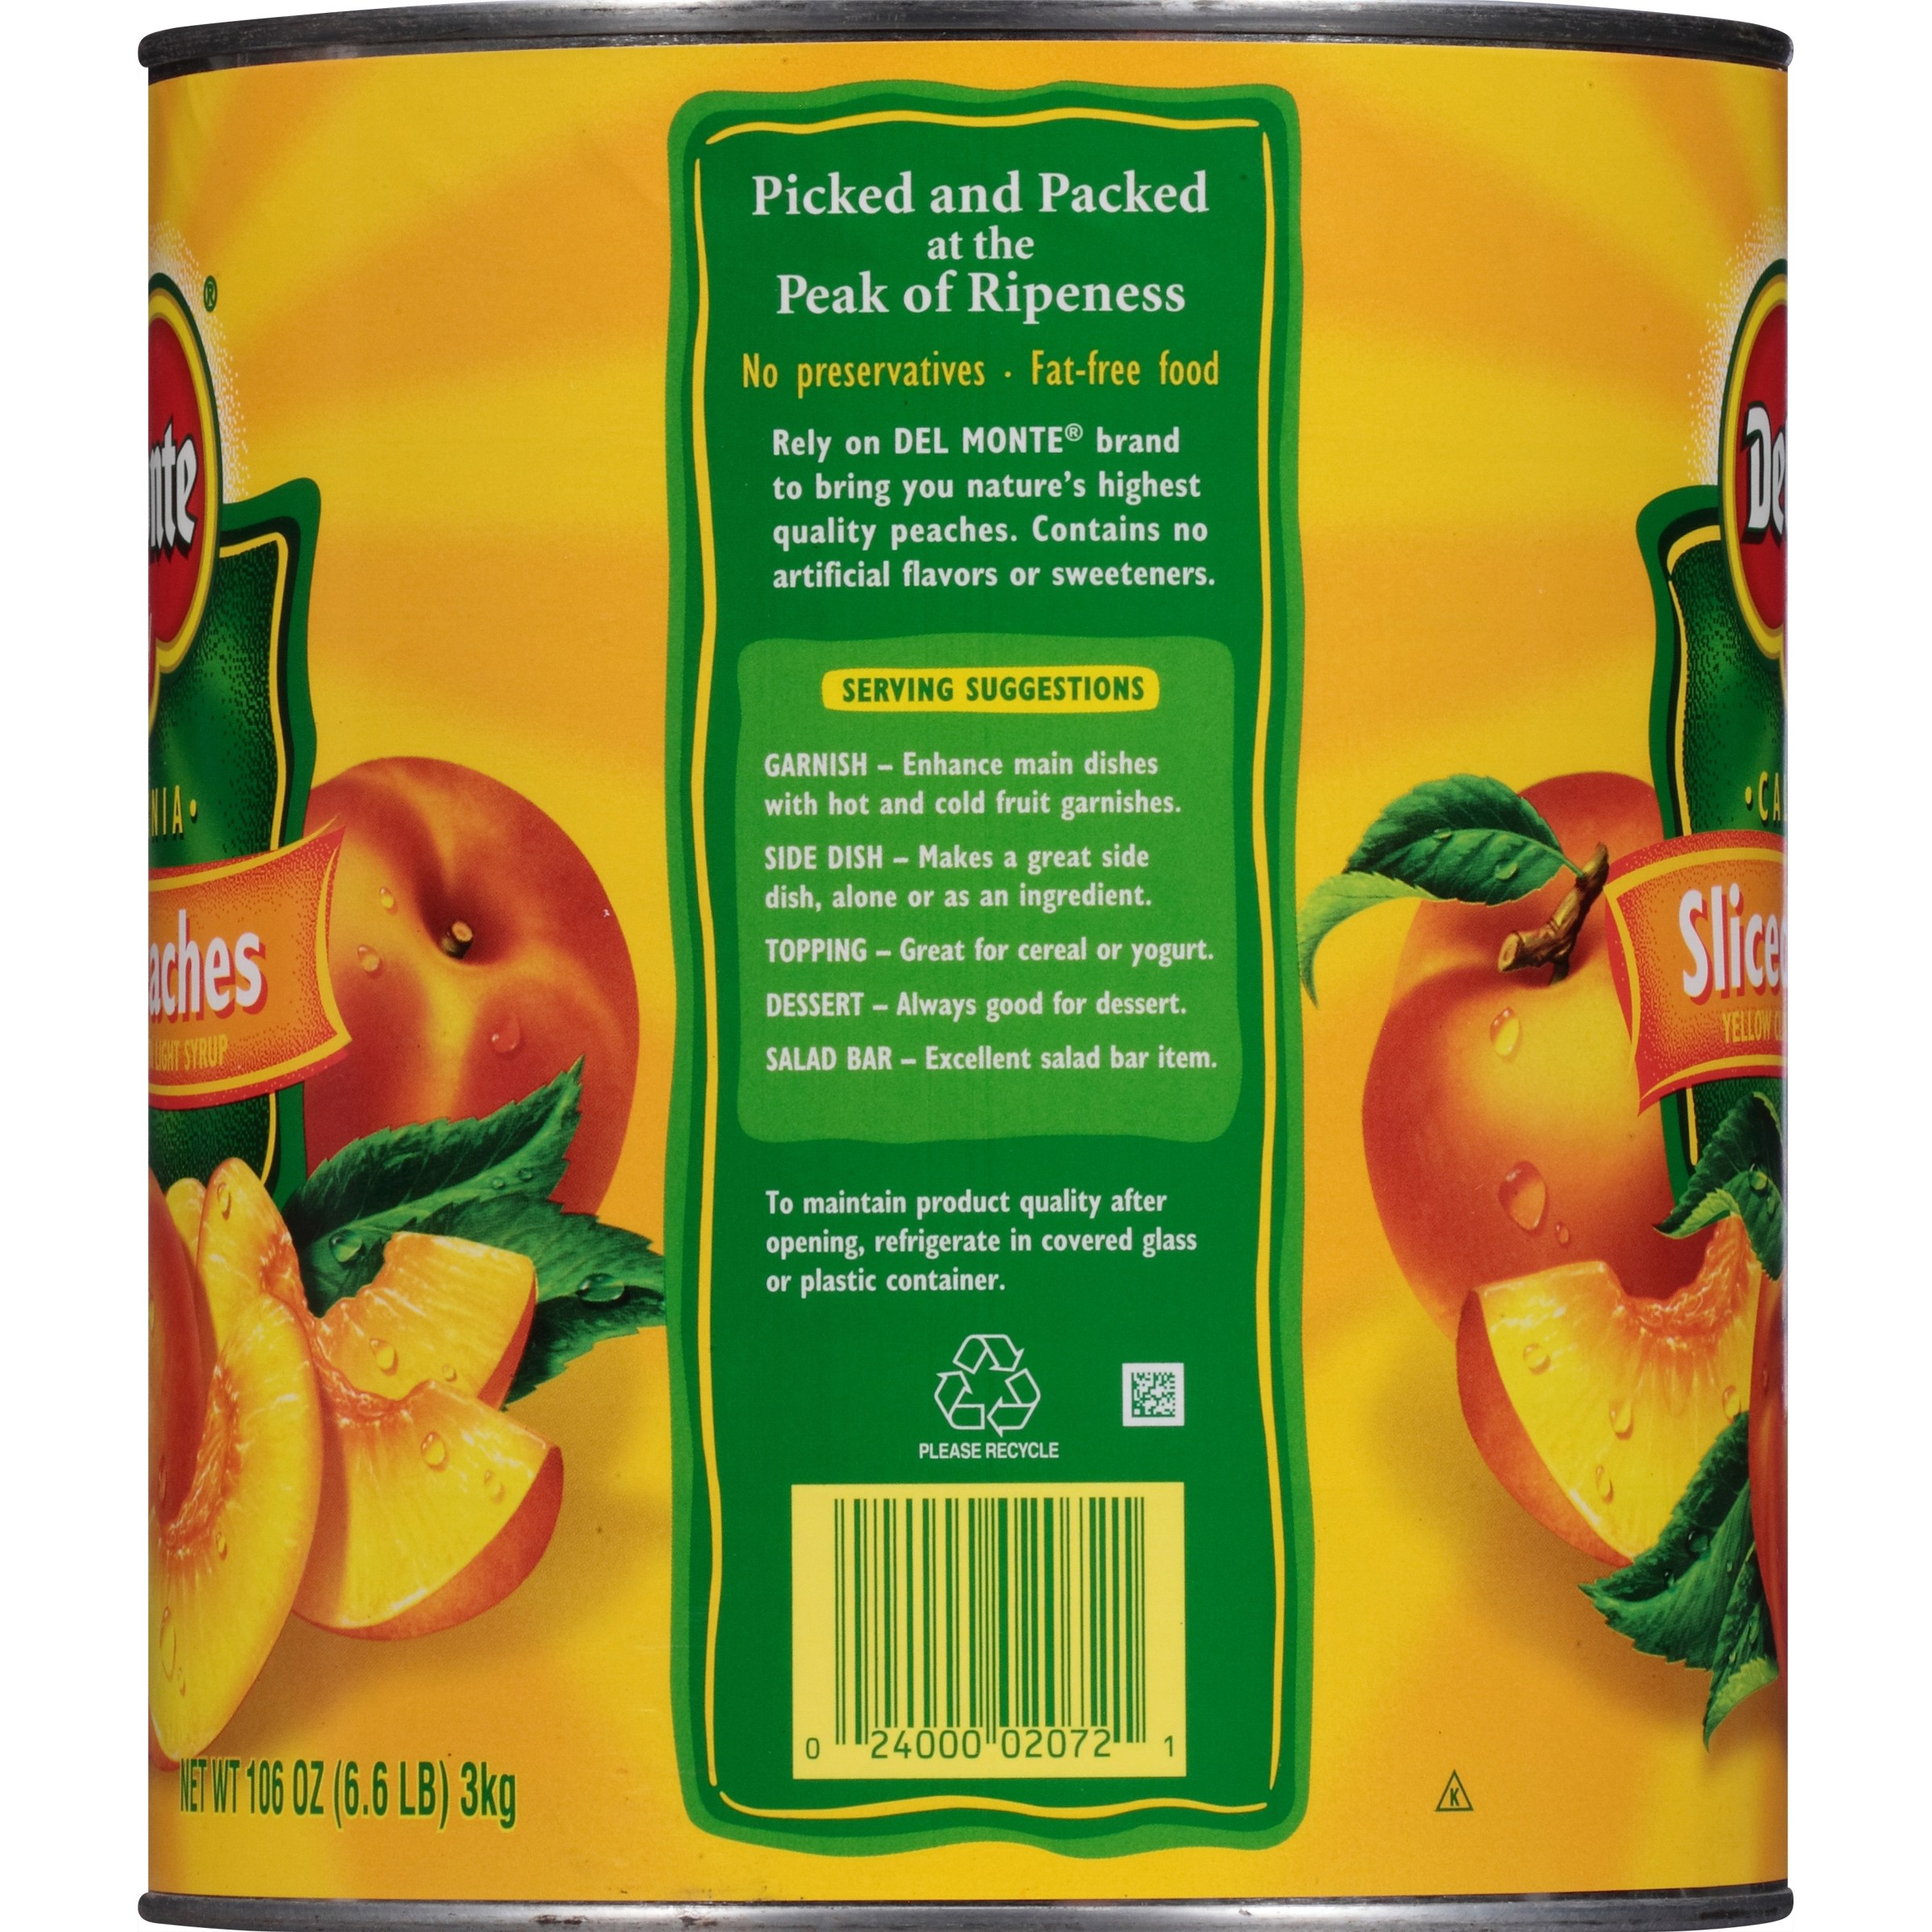 Del Monte Lite Yellow Cling Sliced Peaches, Canned Fruit, 106 oz Can - image 3 of 6